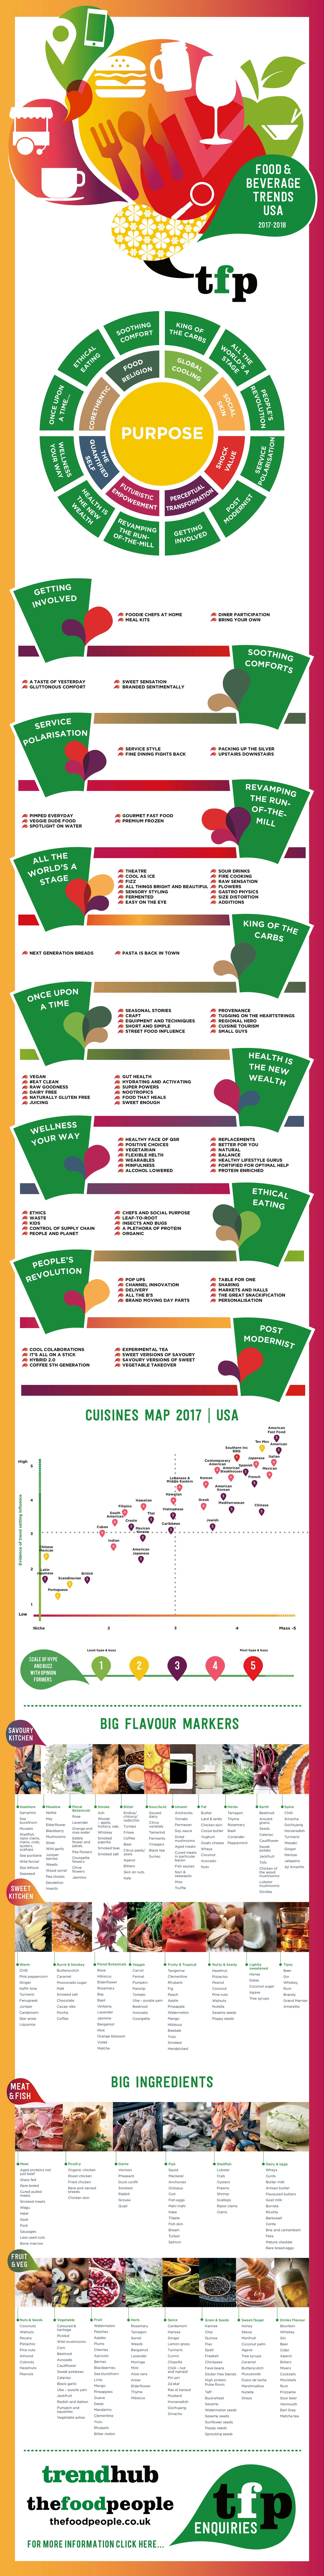 Infographic of Food and Beverage Trends 2017 - USA